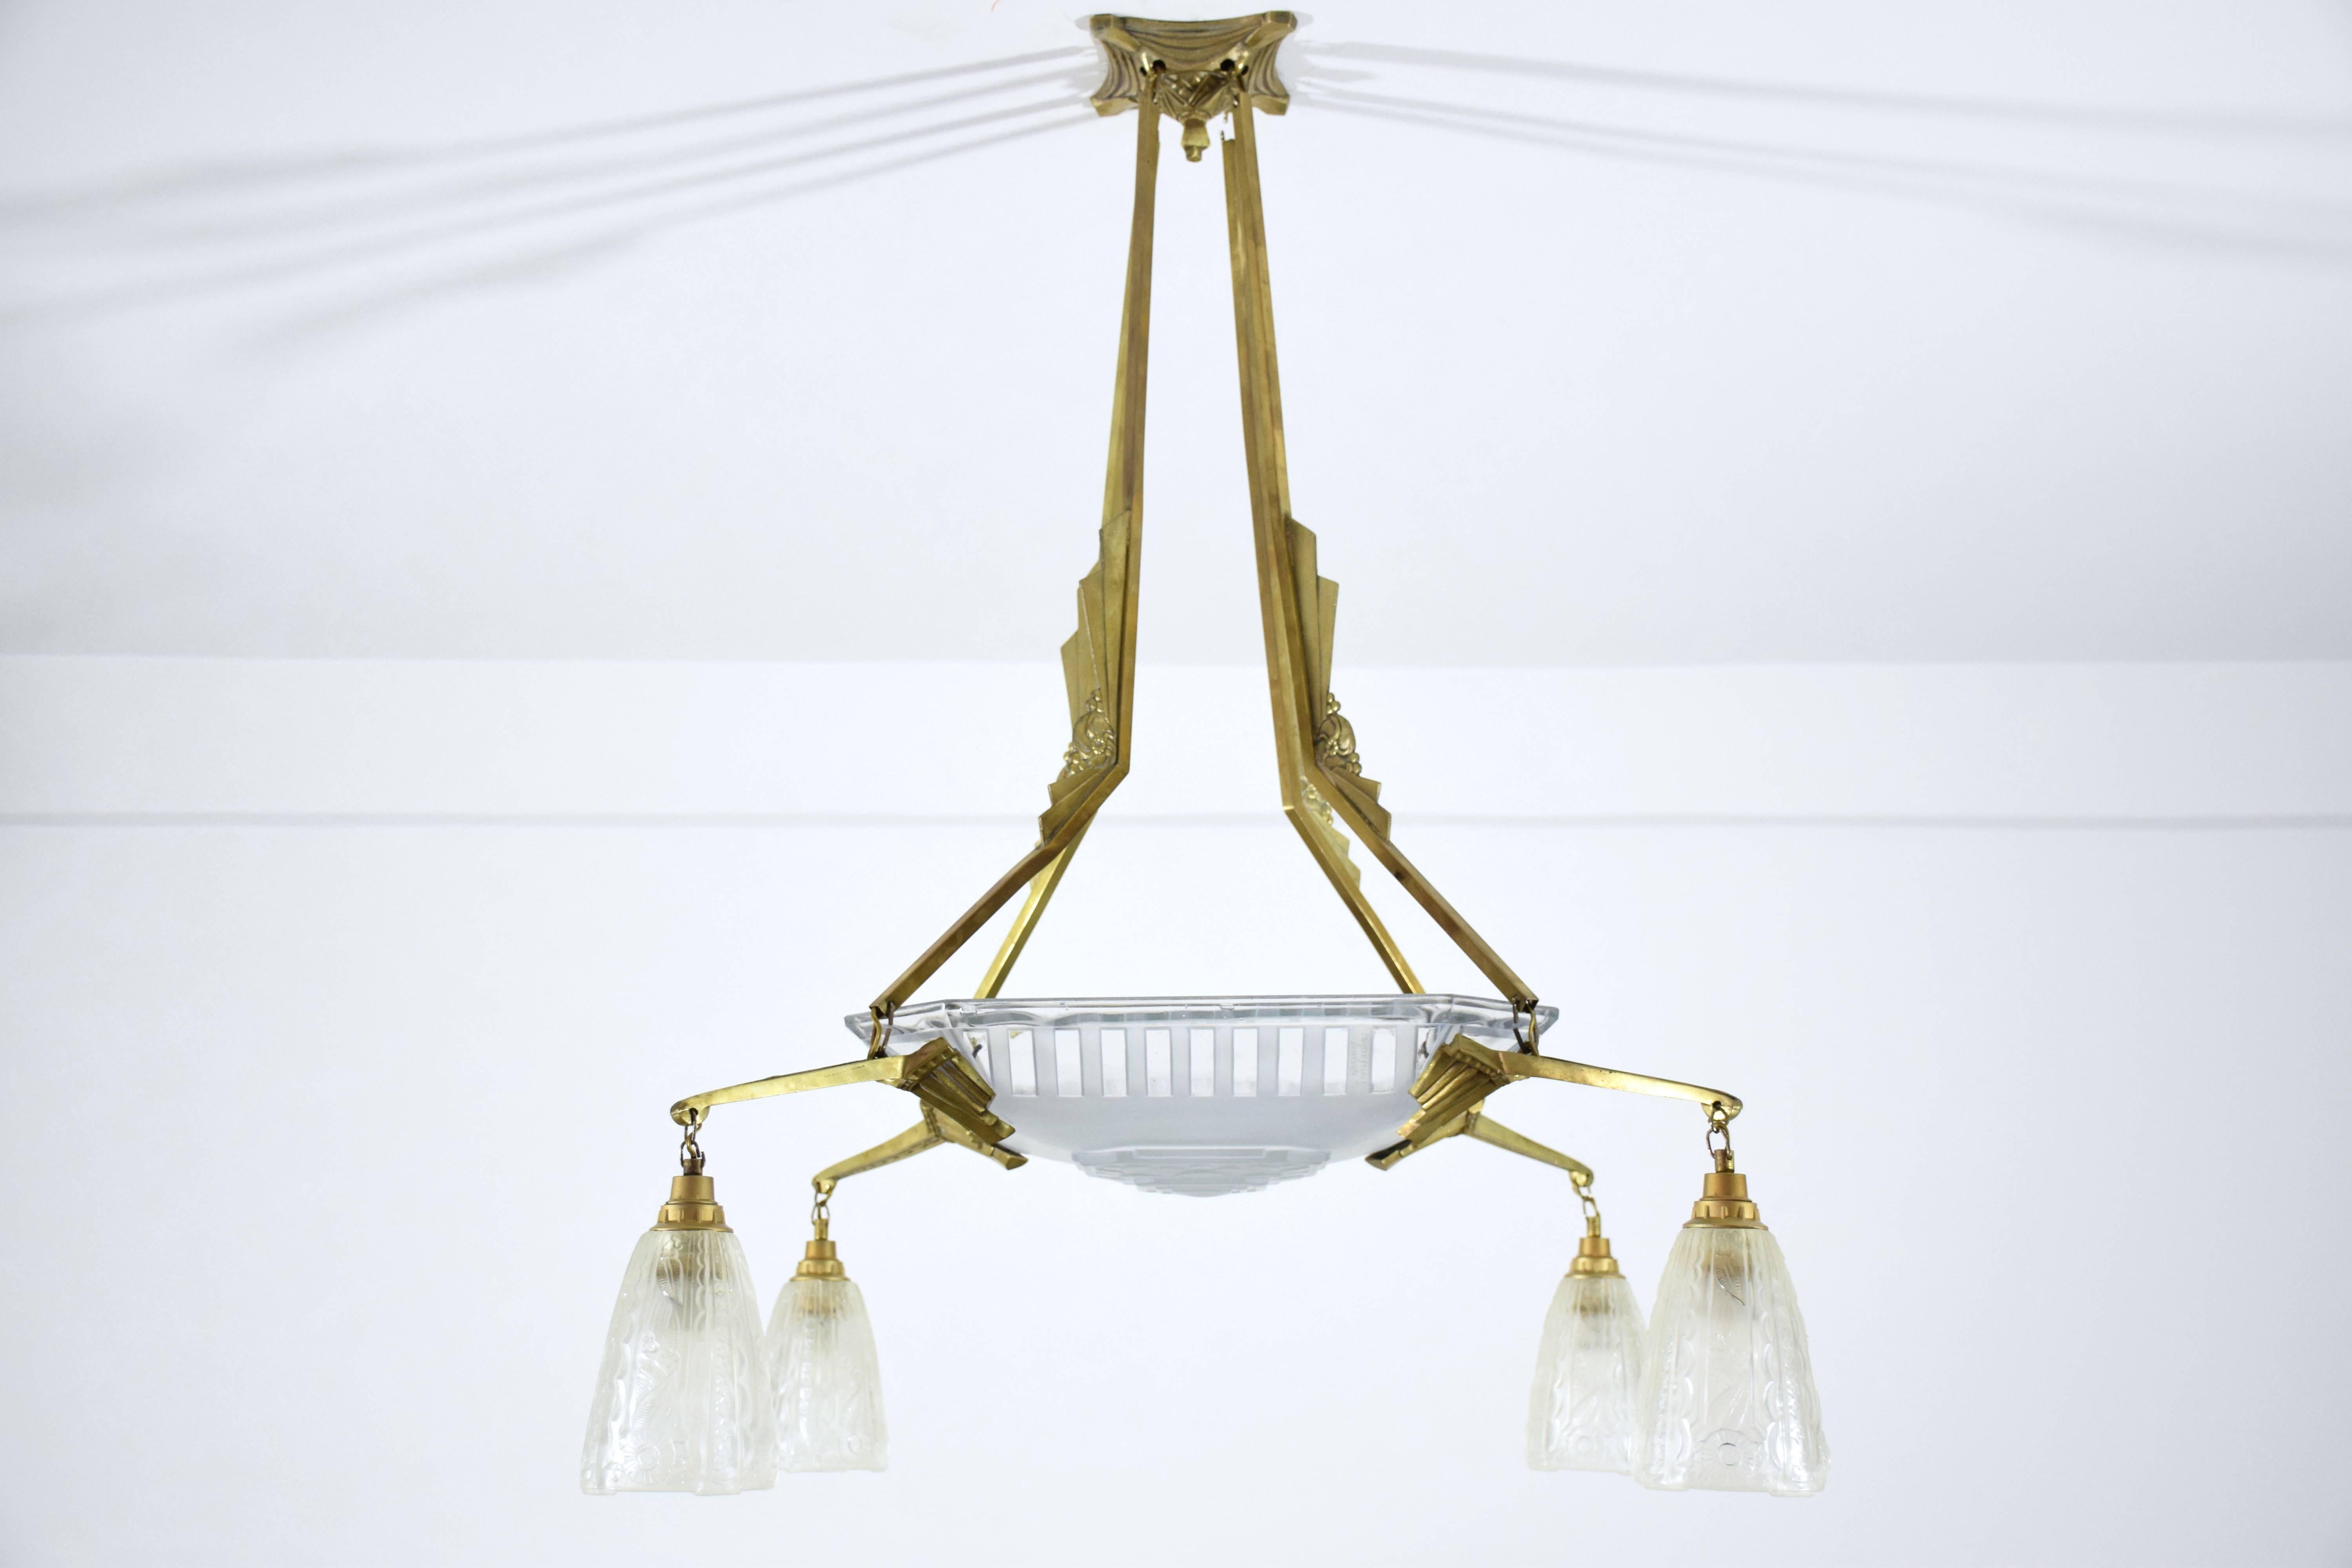  20th Century vintage French chandelier chandelier signed Freres Muller Luneville composed of an intriguing winged bronze structure and four moulded frosted glass shades. 

This creation is an example of the Frères Muller's evolution into the Art